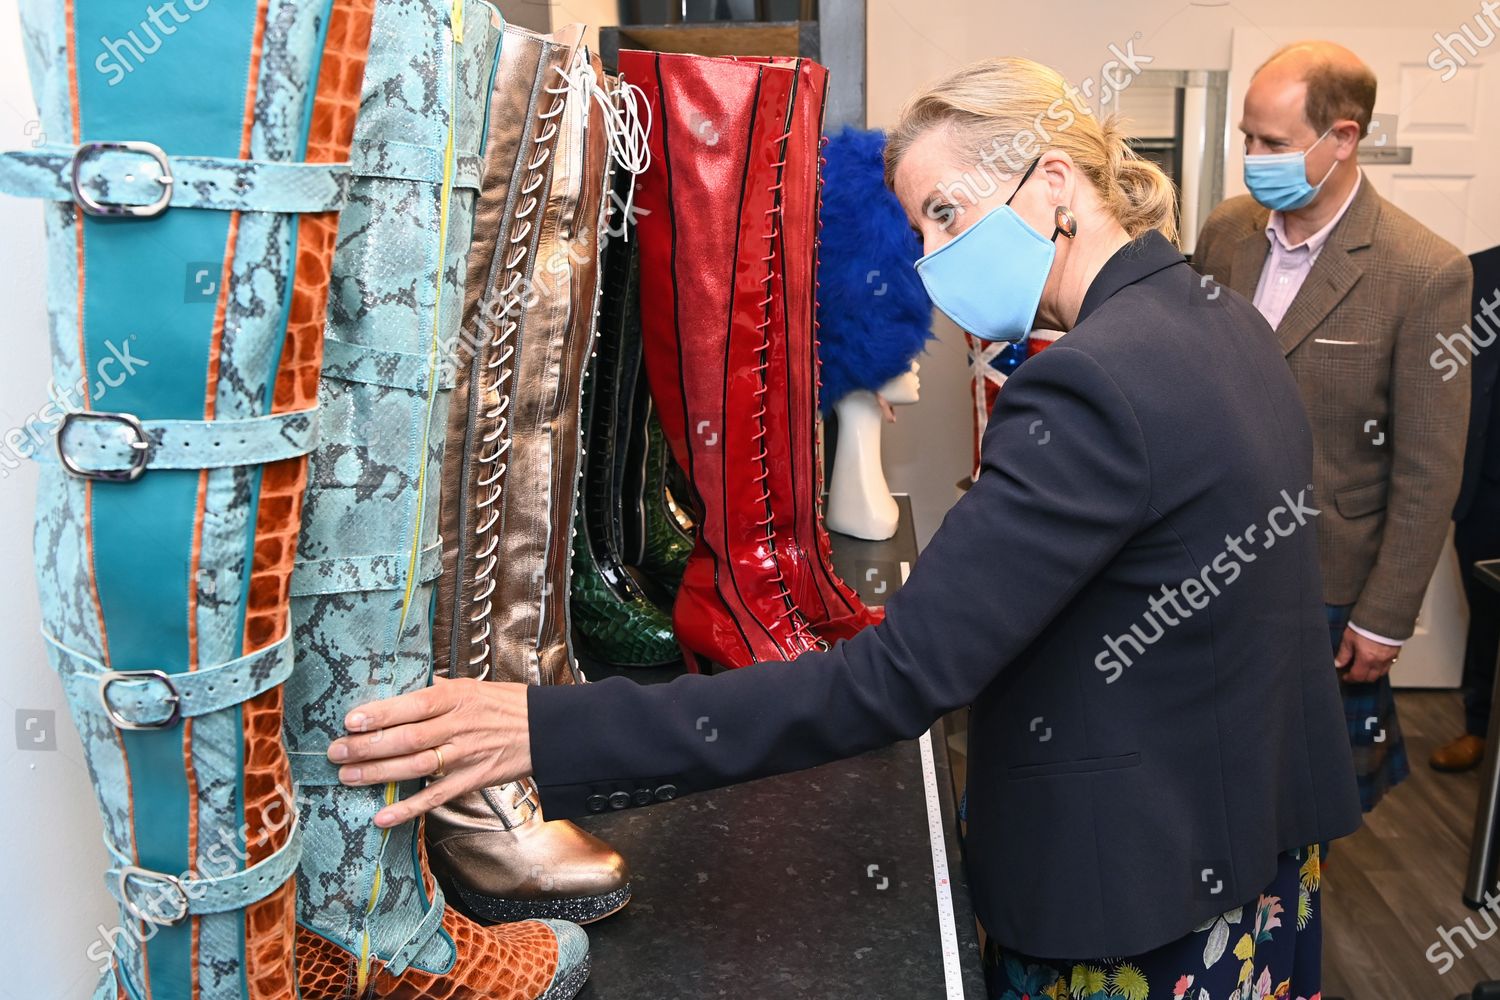 CASA REAL BRITÁNICA - Página 75 Prince-edward-and-sophie-countess-of-wessex-visit-to-utopia-costumes-forfar-scotland-uk-shutterstock-editorial-12172309ad